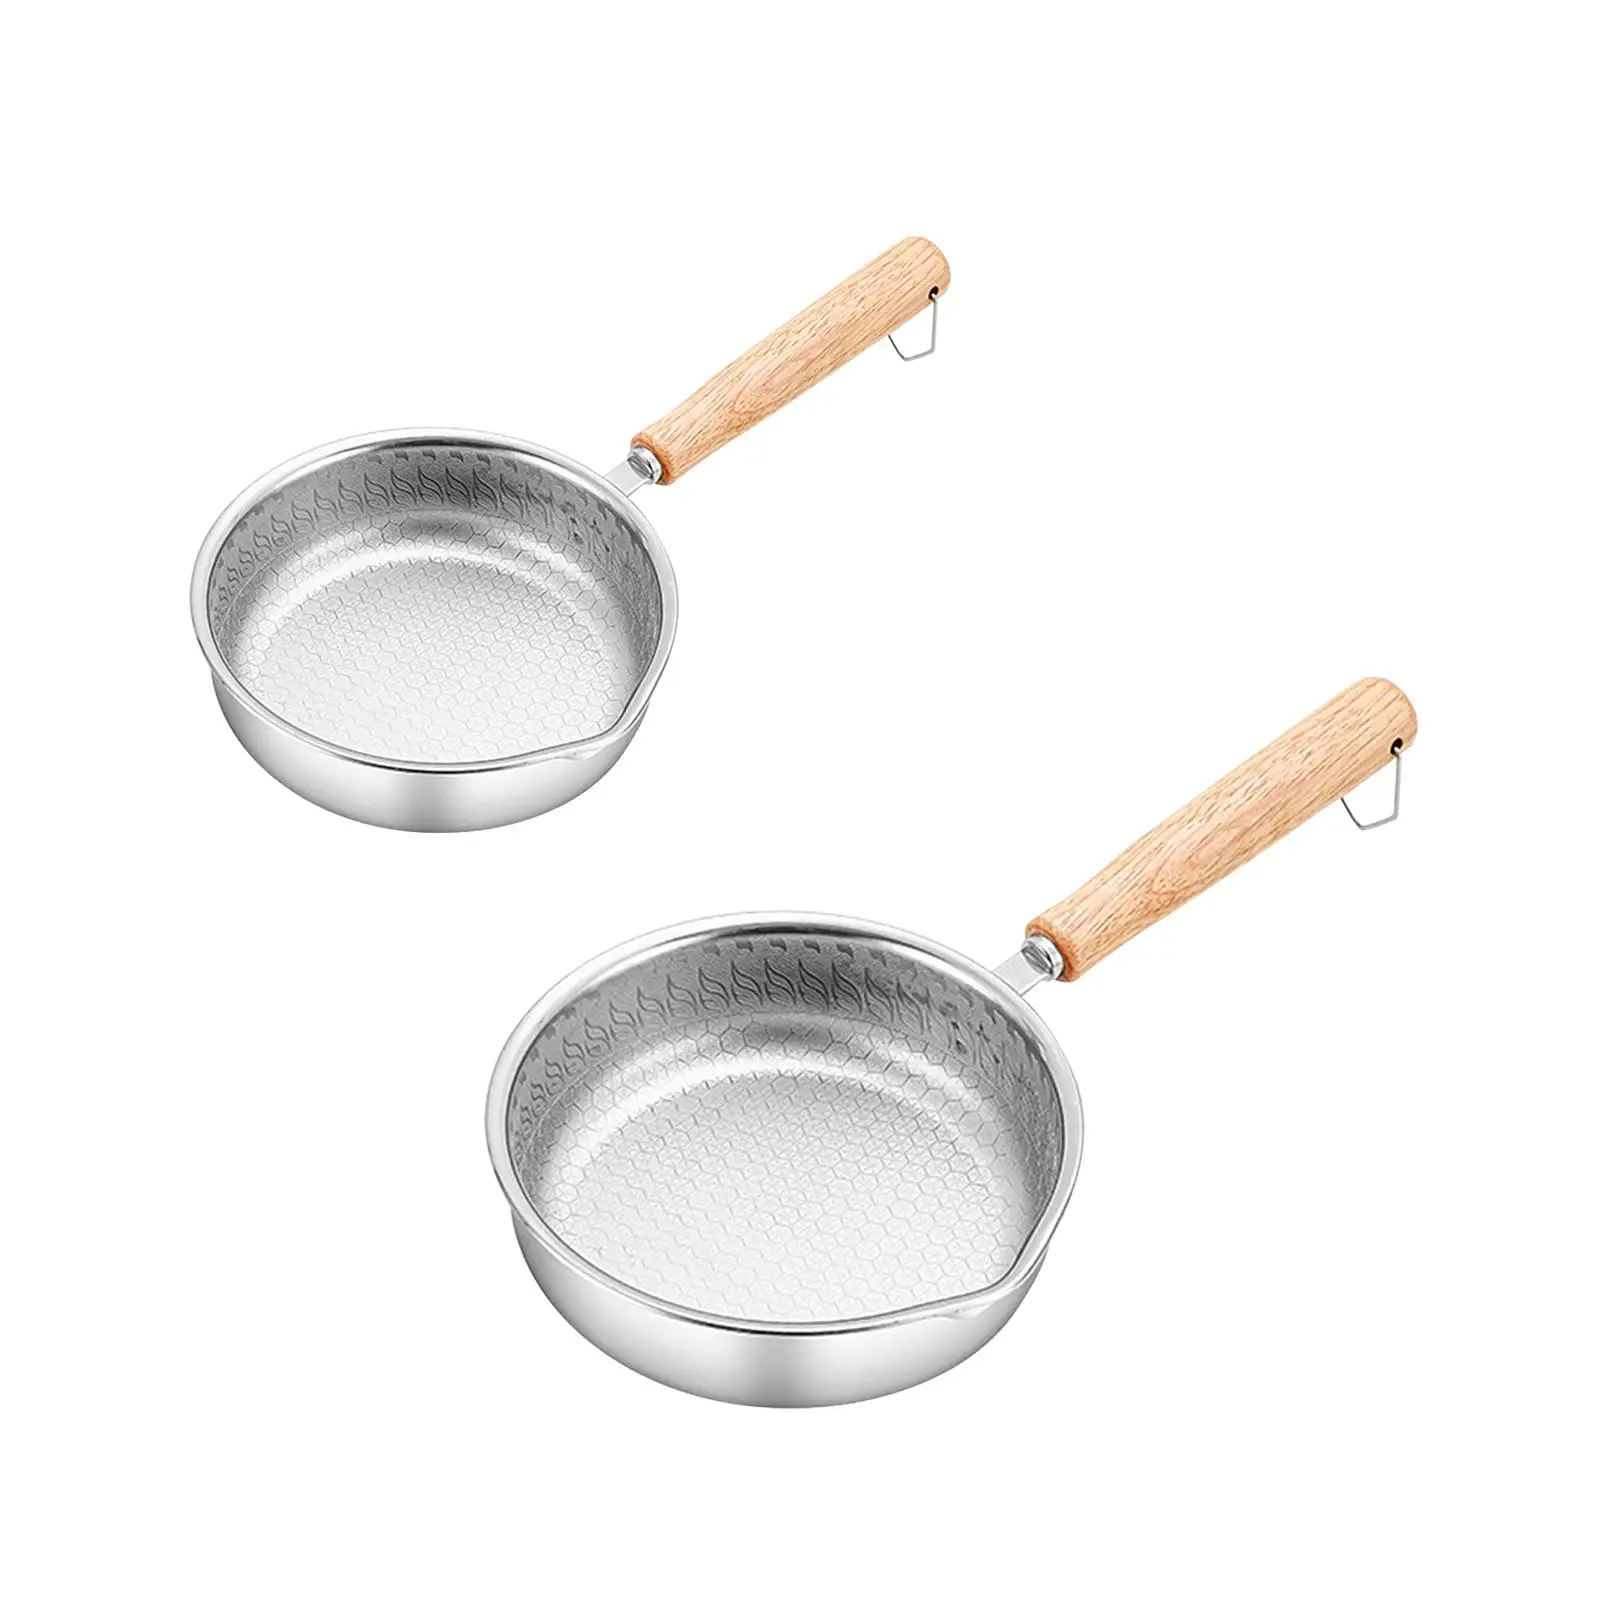 Mini Nonstick Egg Pan Nonstick Stainless Steel Skillet Omelet Pan for Restaurant Chef Camping Indoor and Outdoor Cooking Kitchen